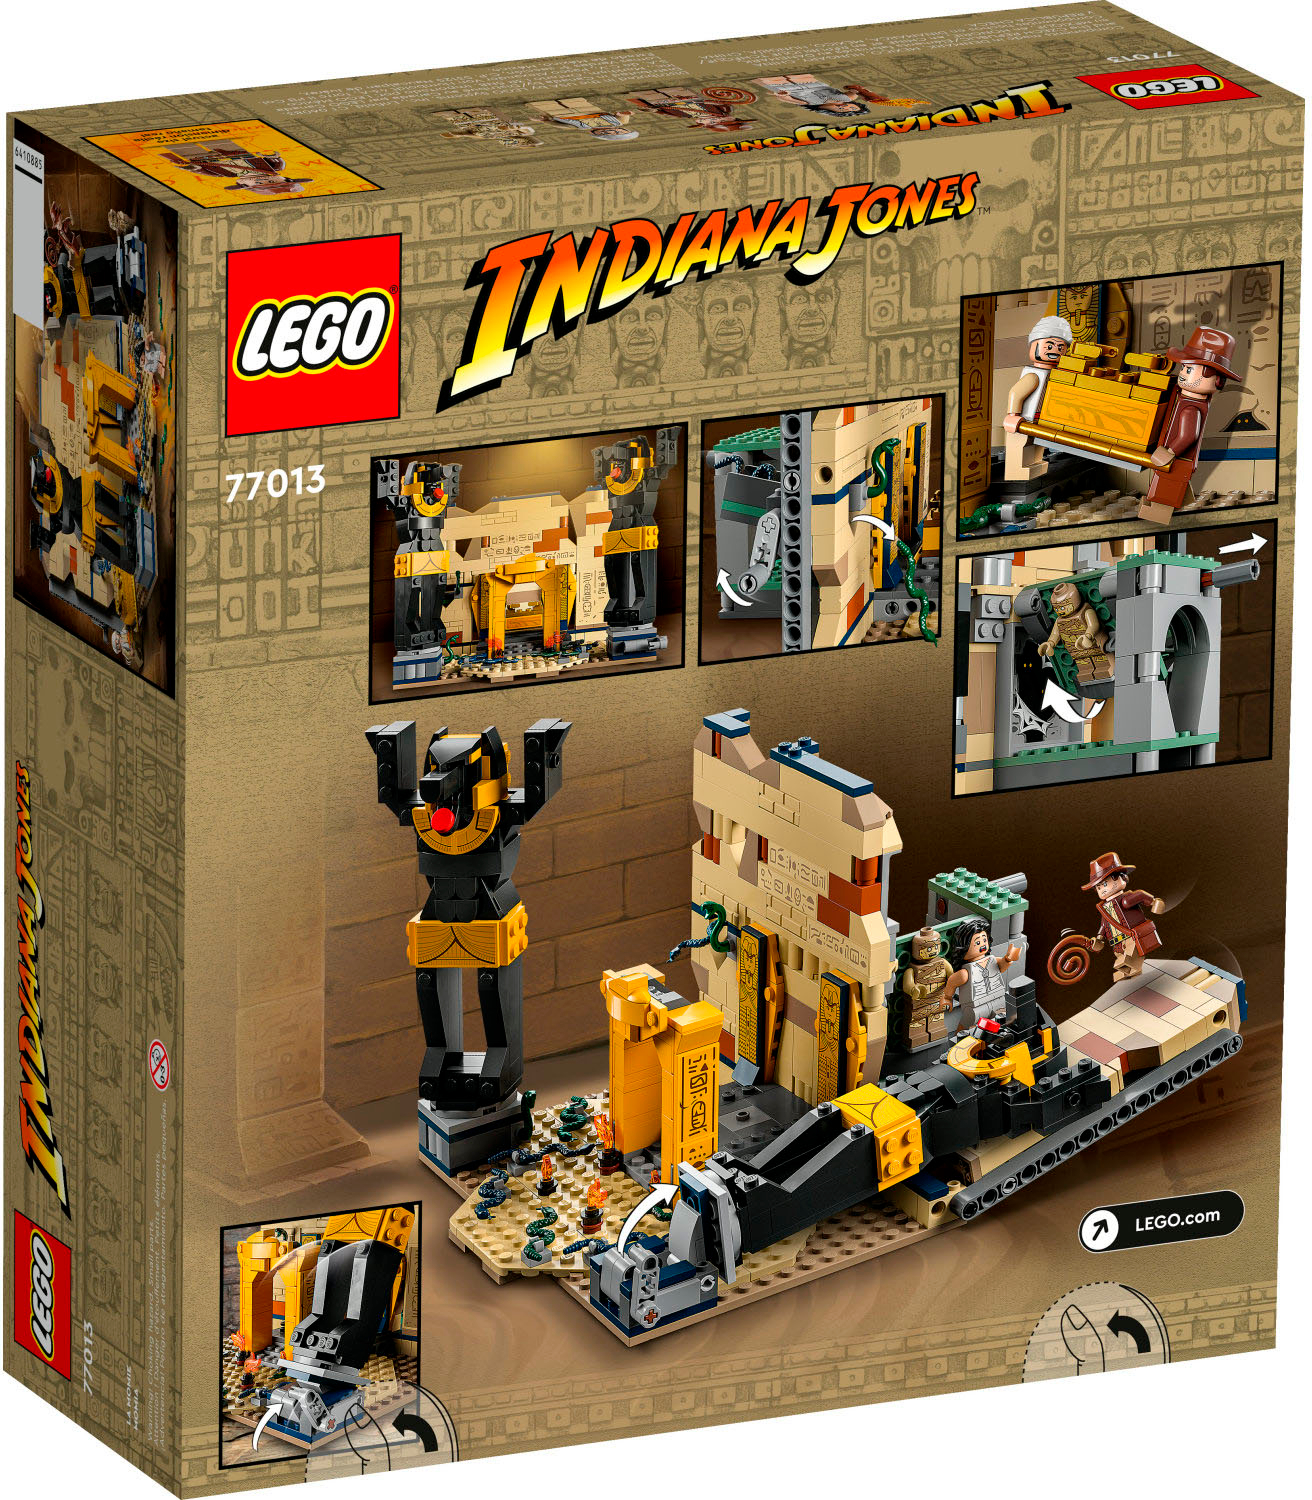 Lego 77013 - Indiana Jones Escape from The Lost Tomb